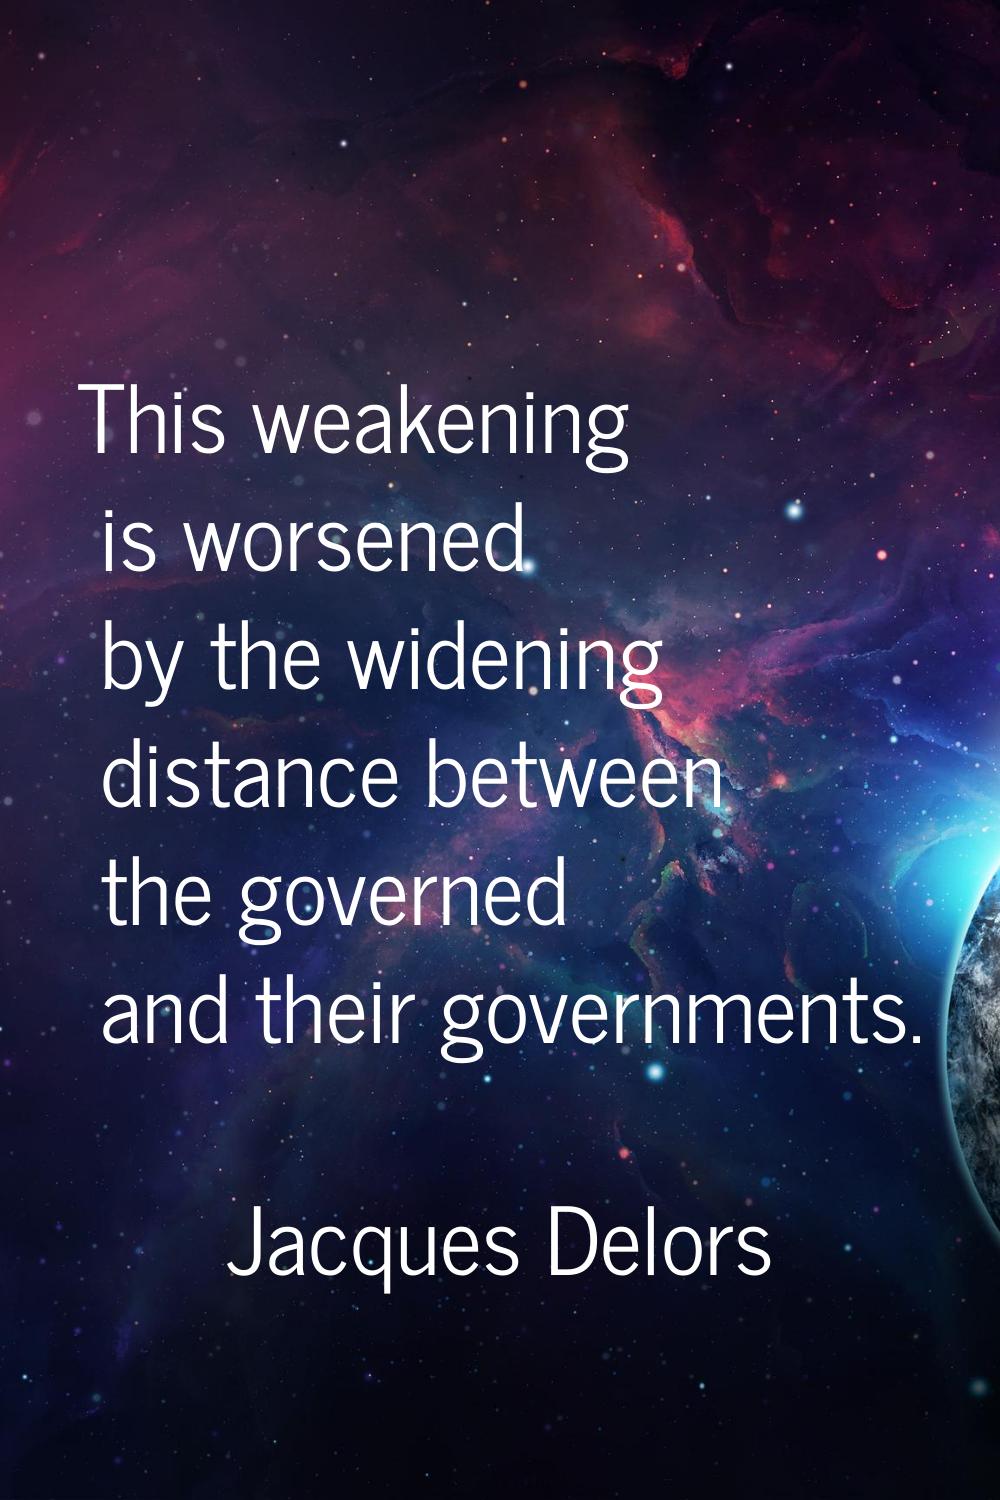 This weakening is worsened by the widening distance between the governed and their governments.